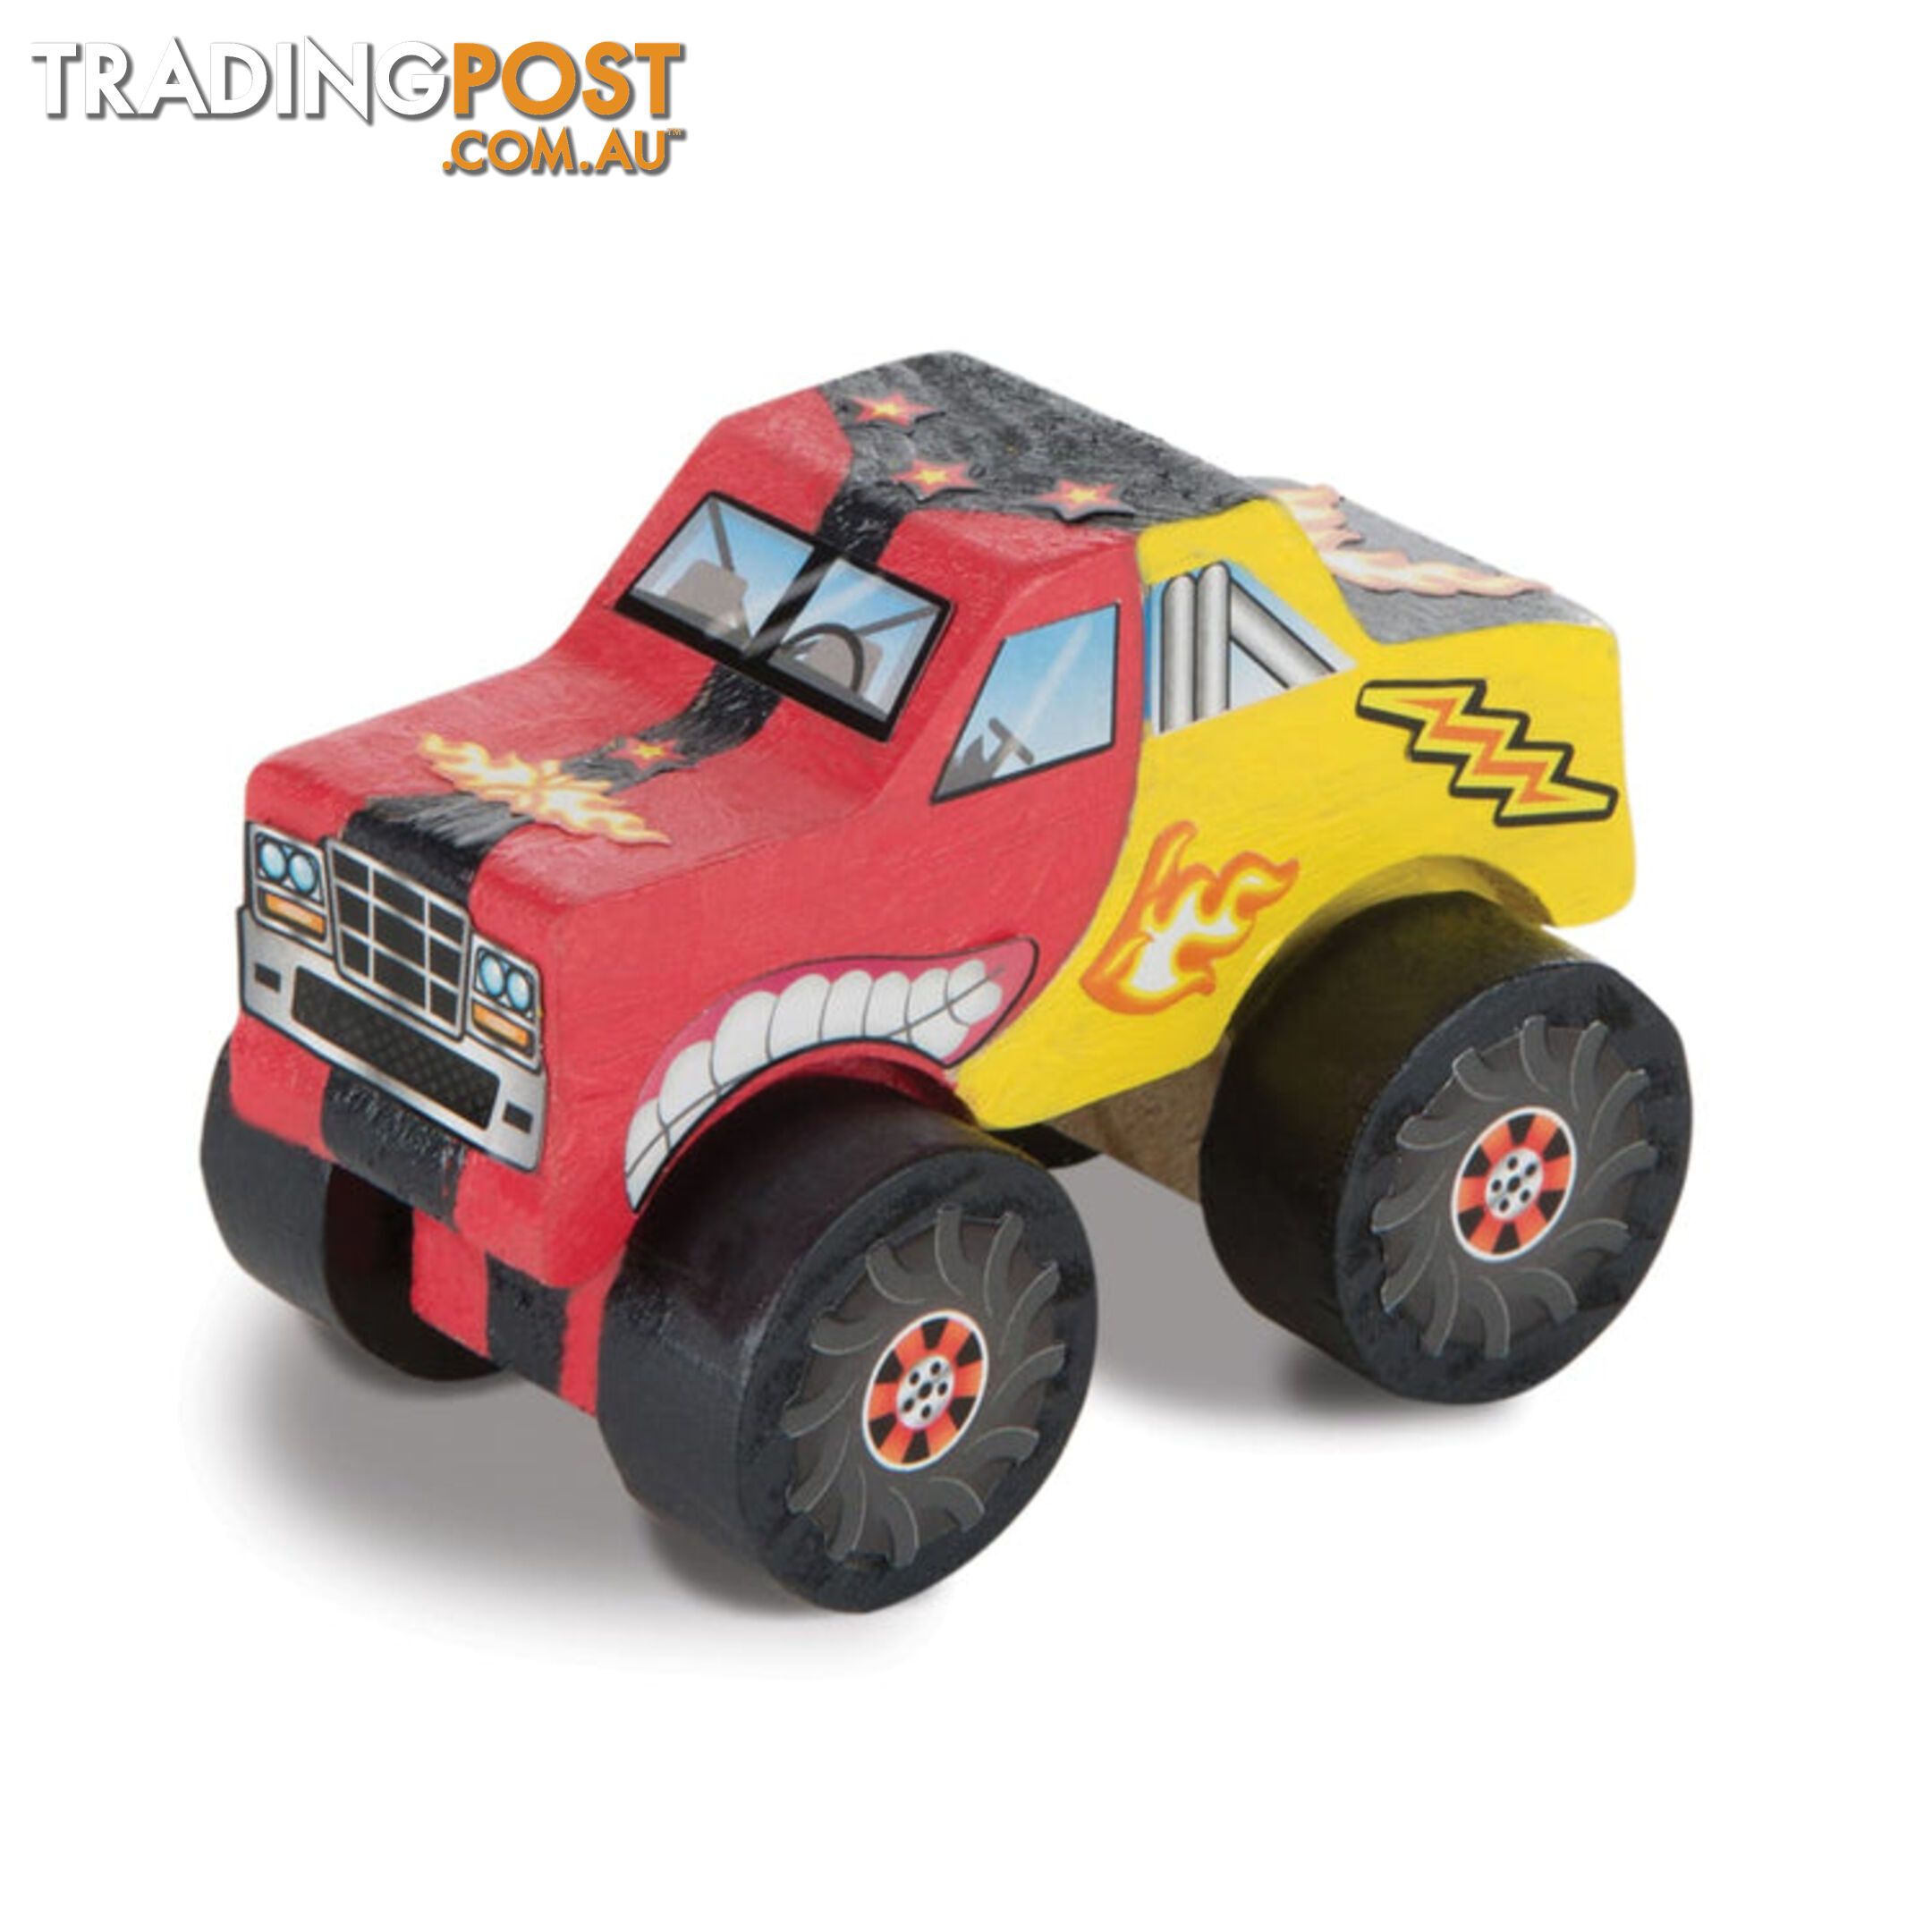 Melissa & Doug - Created By Me! Monster Truck Wooden Craft Kit - Mdmnd9524 - 000772095242